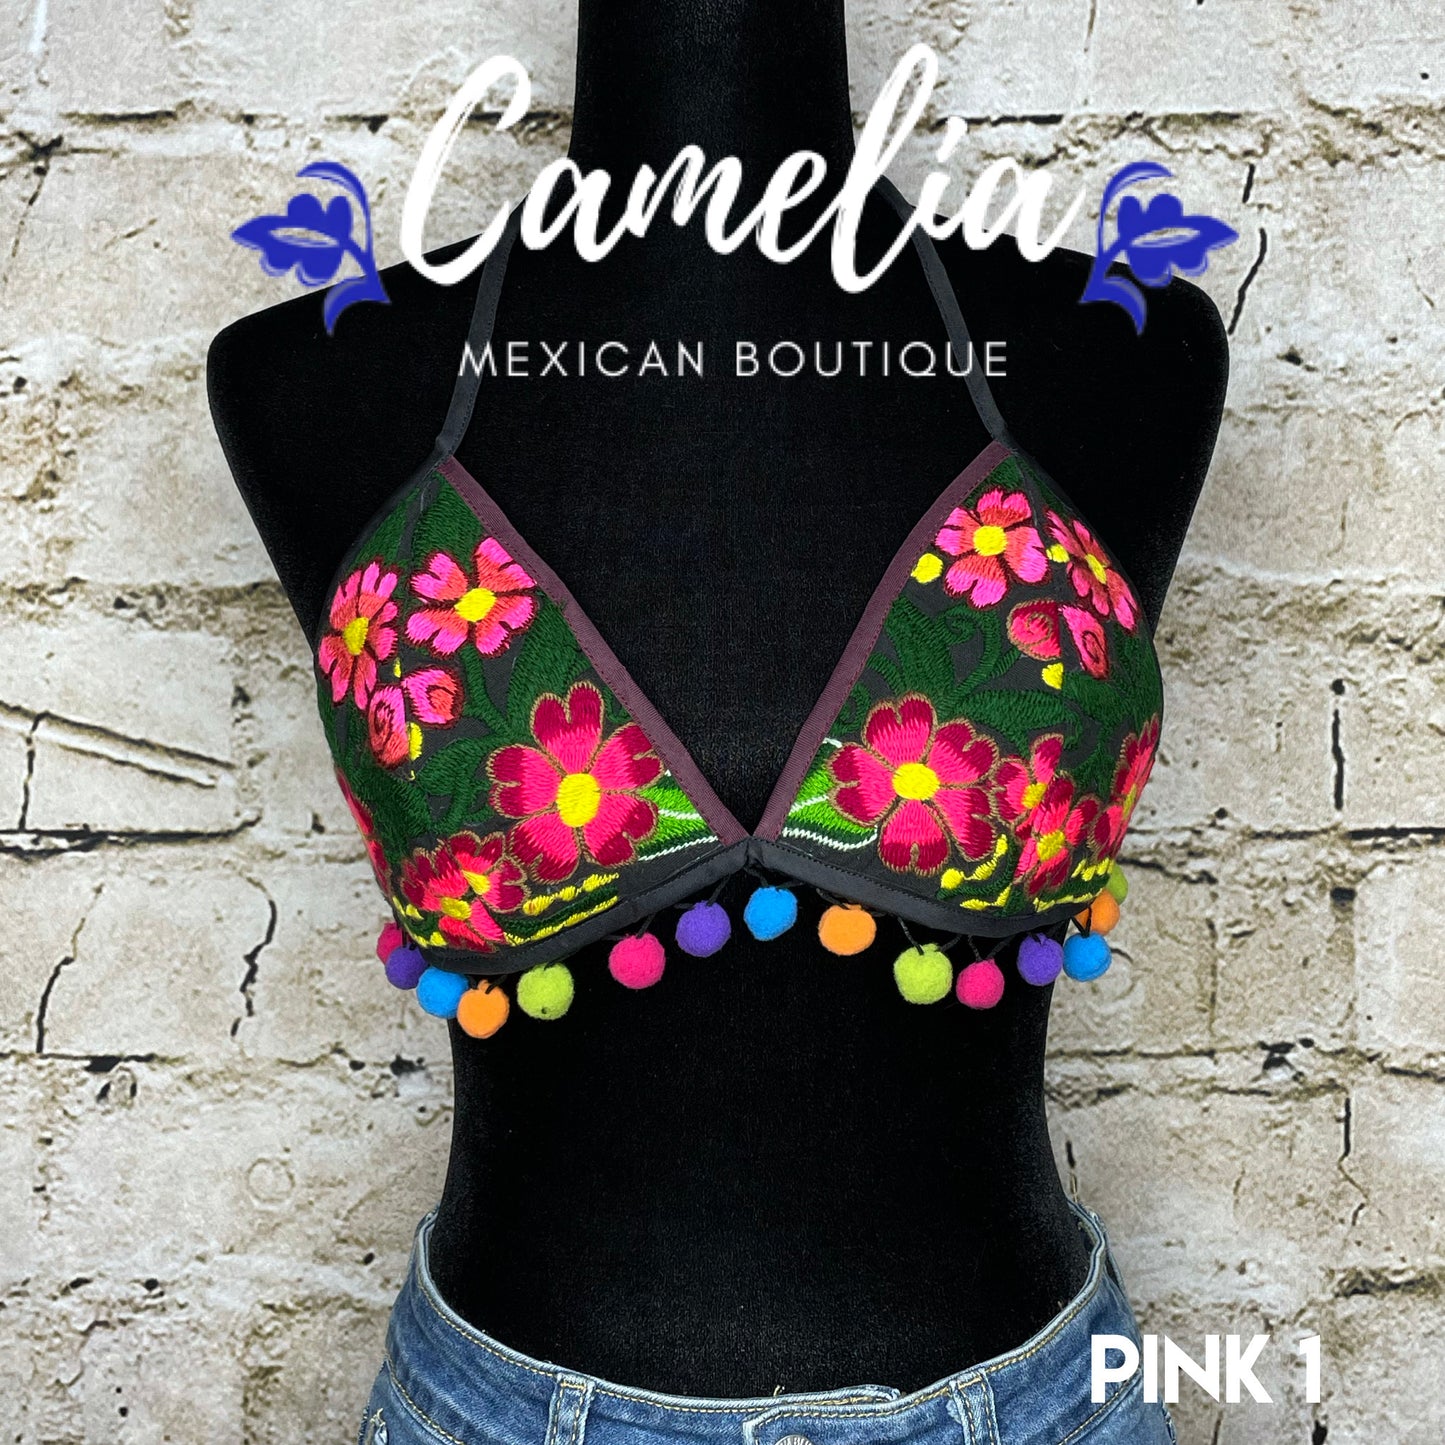 Mexican Embroidered Bikini Top with Poms - ZINNIA